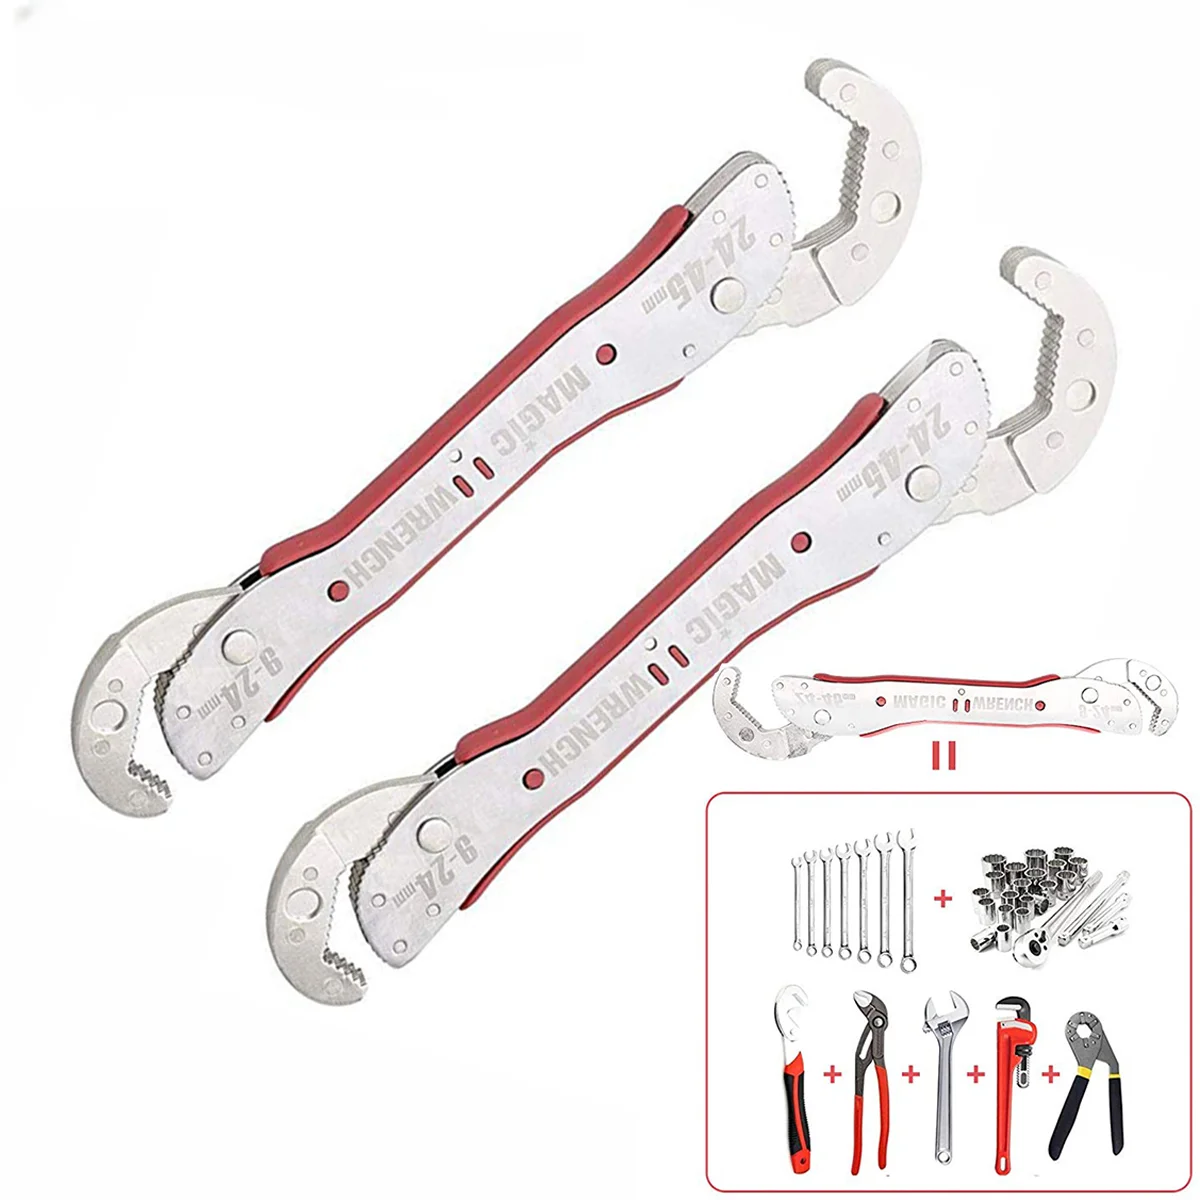 

9-45mm Adjustable Universal Wrench Spanner Tool Home Hand Tool Ratchet Key Set Wrench Multi-functional Universal Spanner